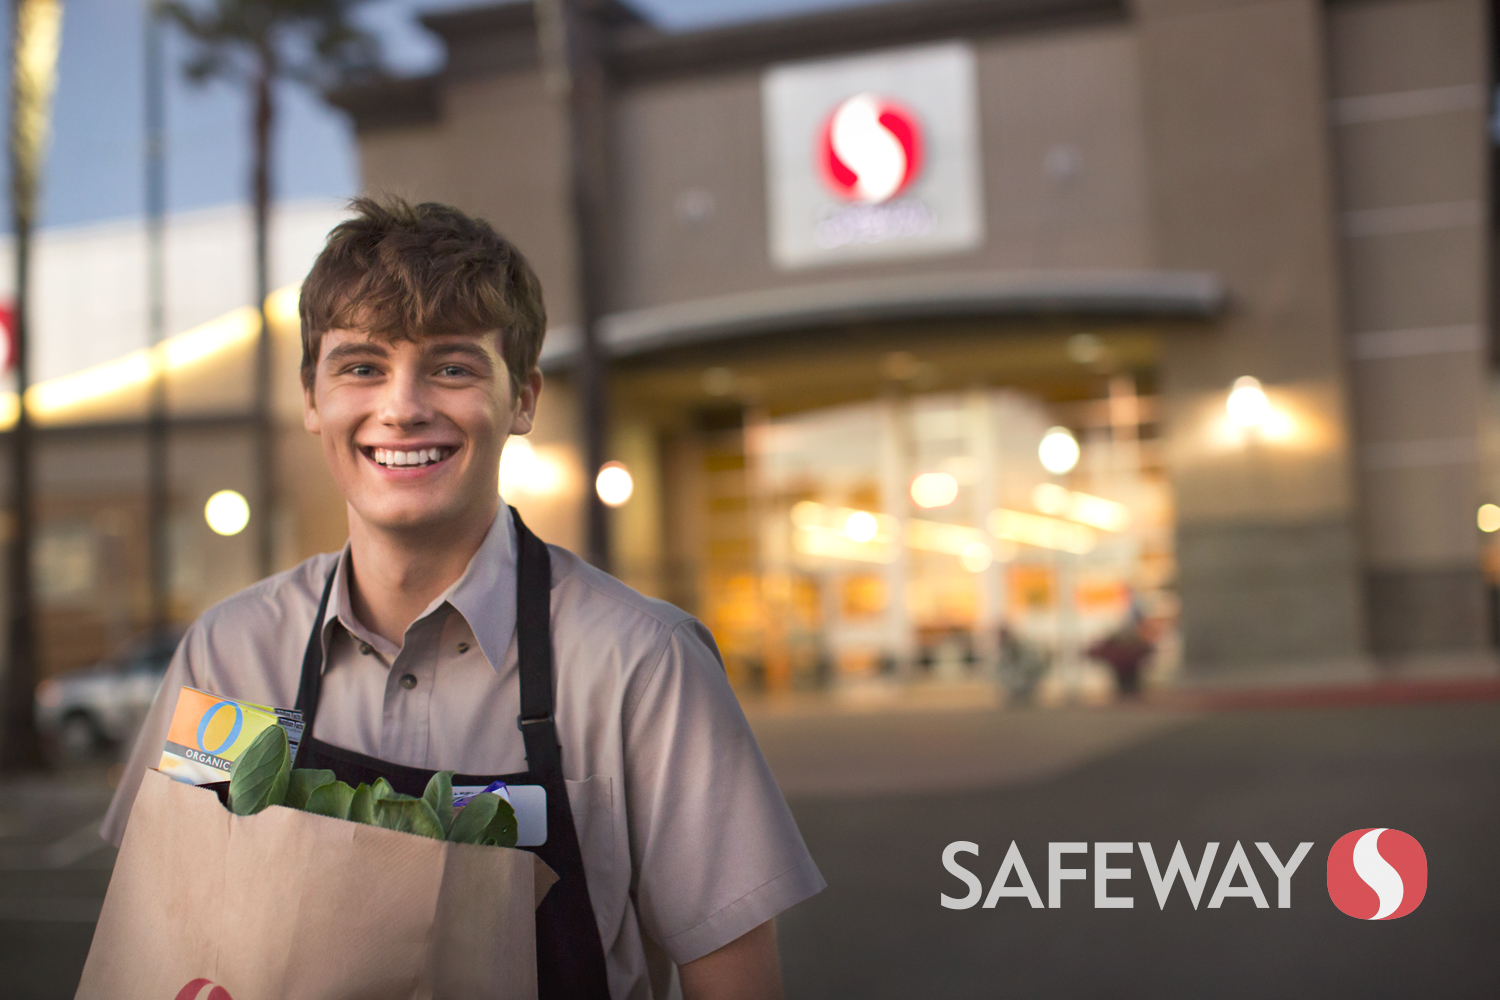 An employee carries groceries in a Safeway Ad Campaign photographed by Lifestyle Photographer Diana Mulvihill